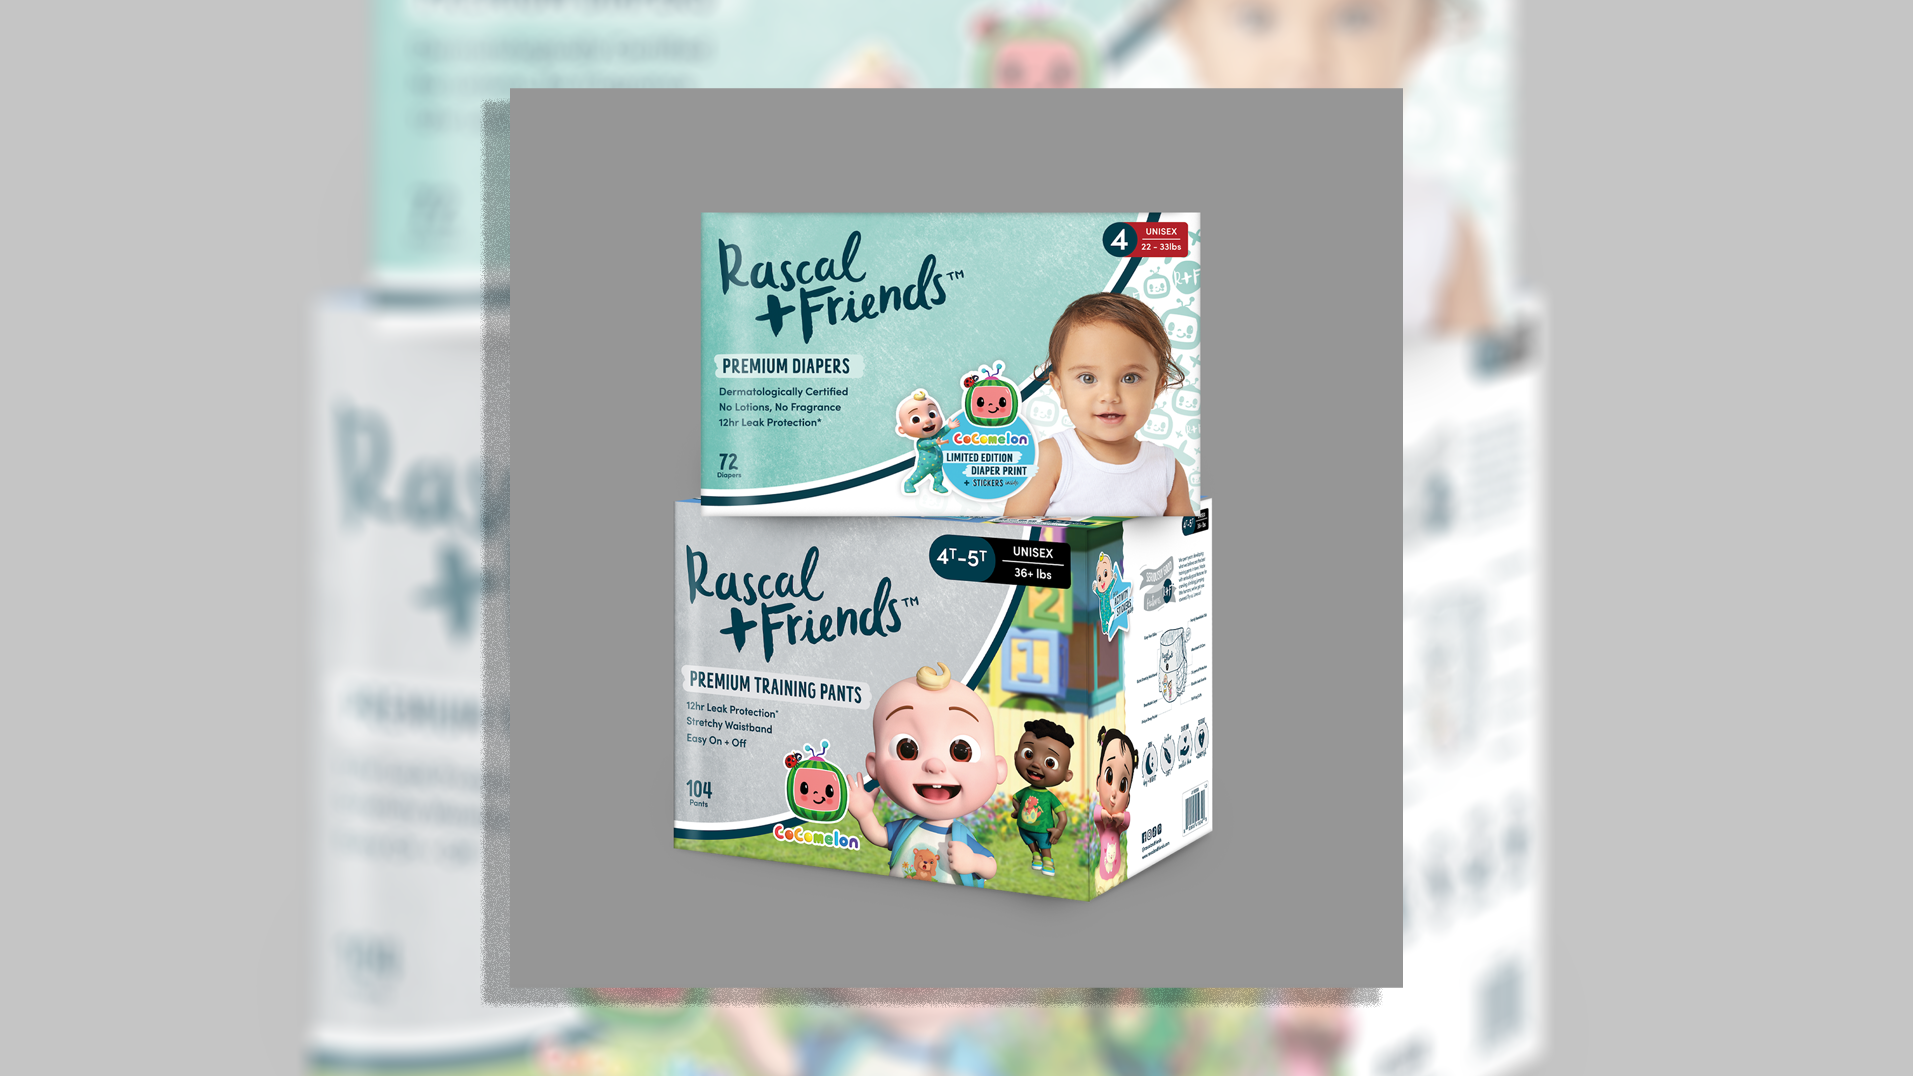 Rascal + Friends Premium Diapers, Size 3, 364 Count